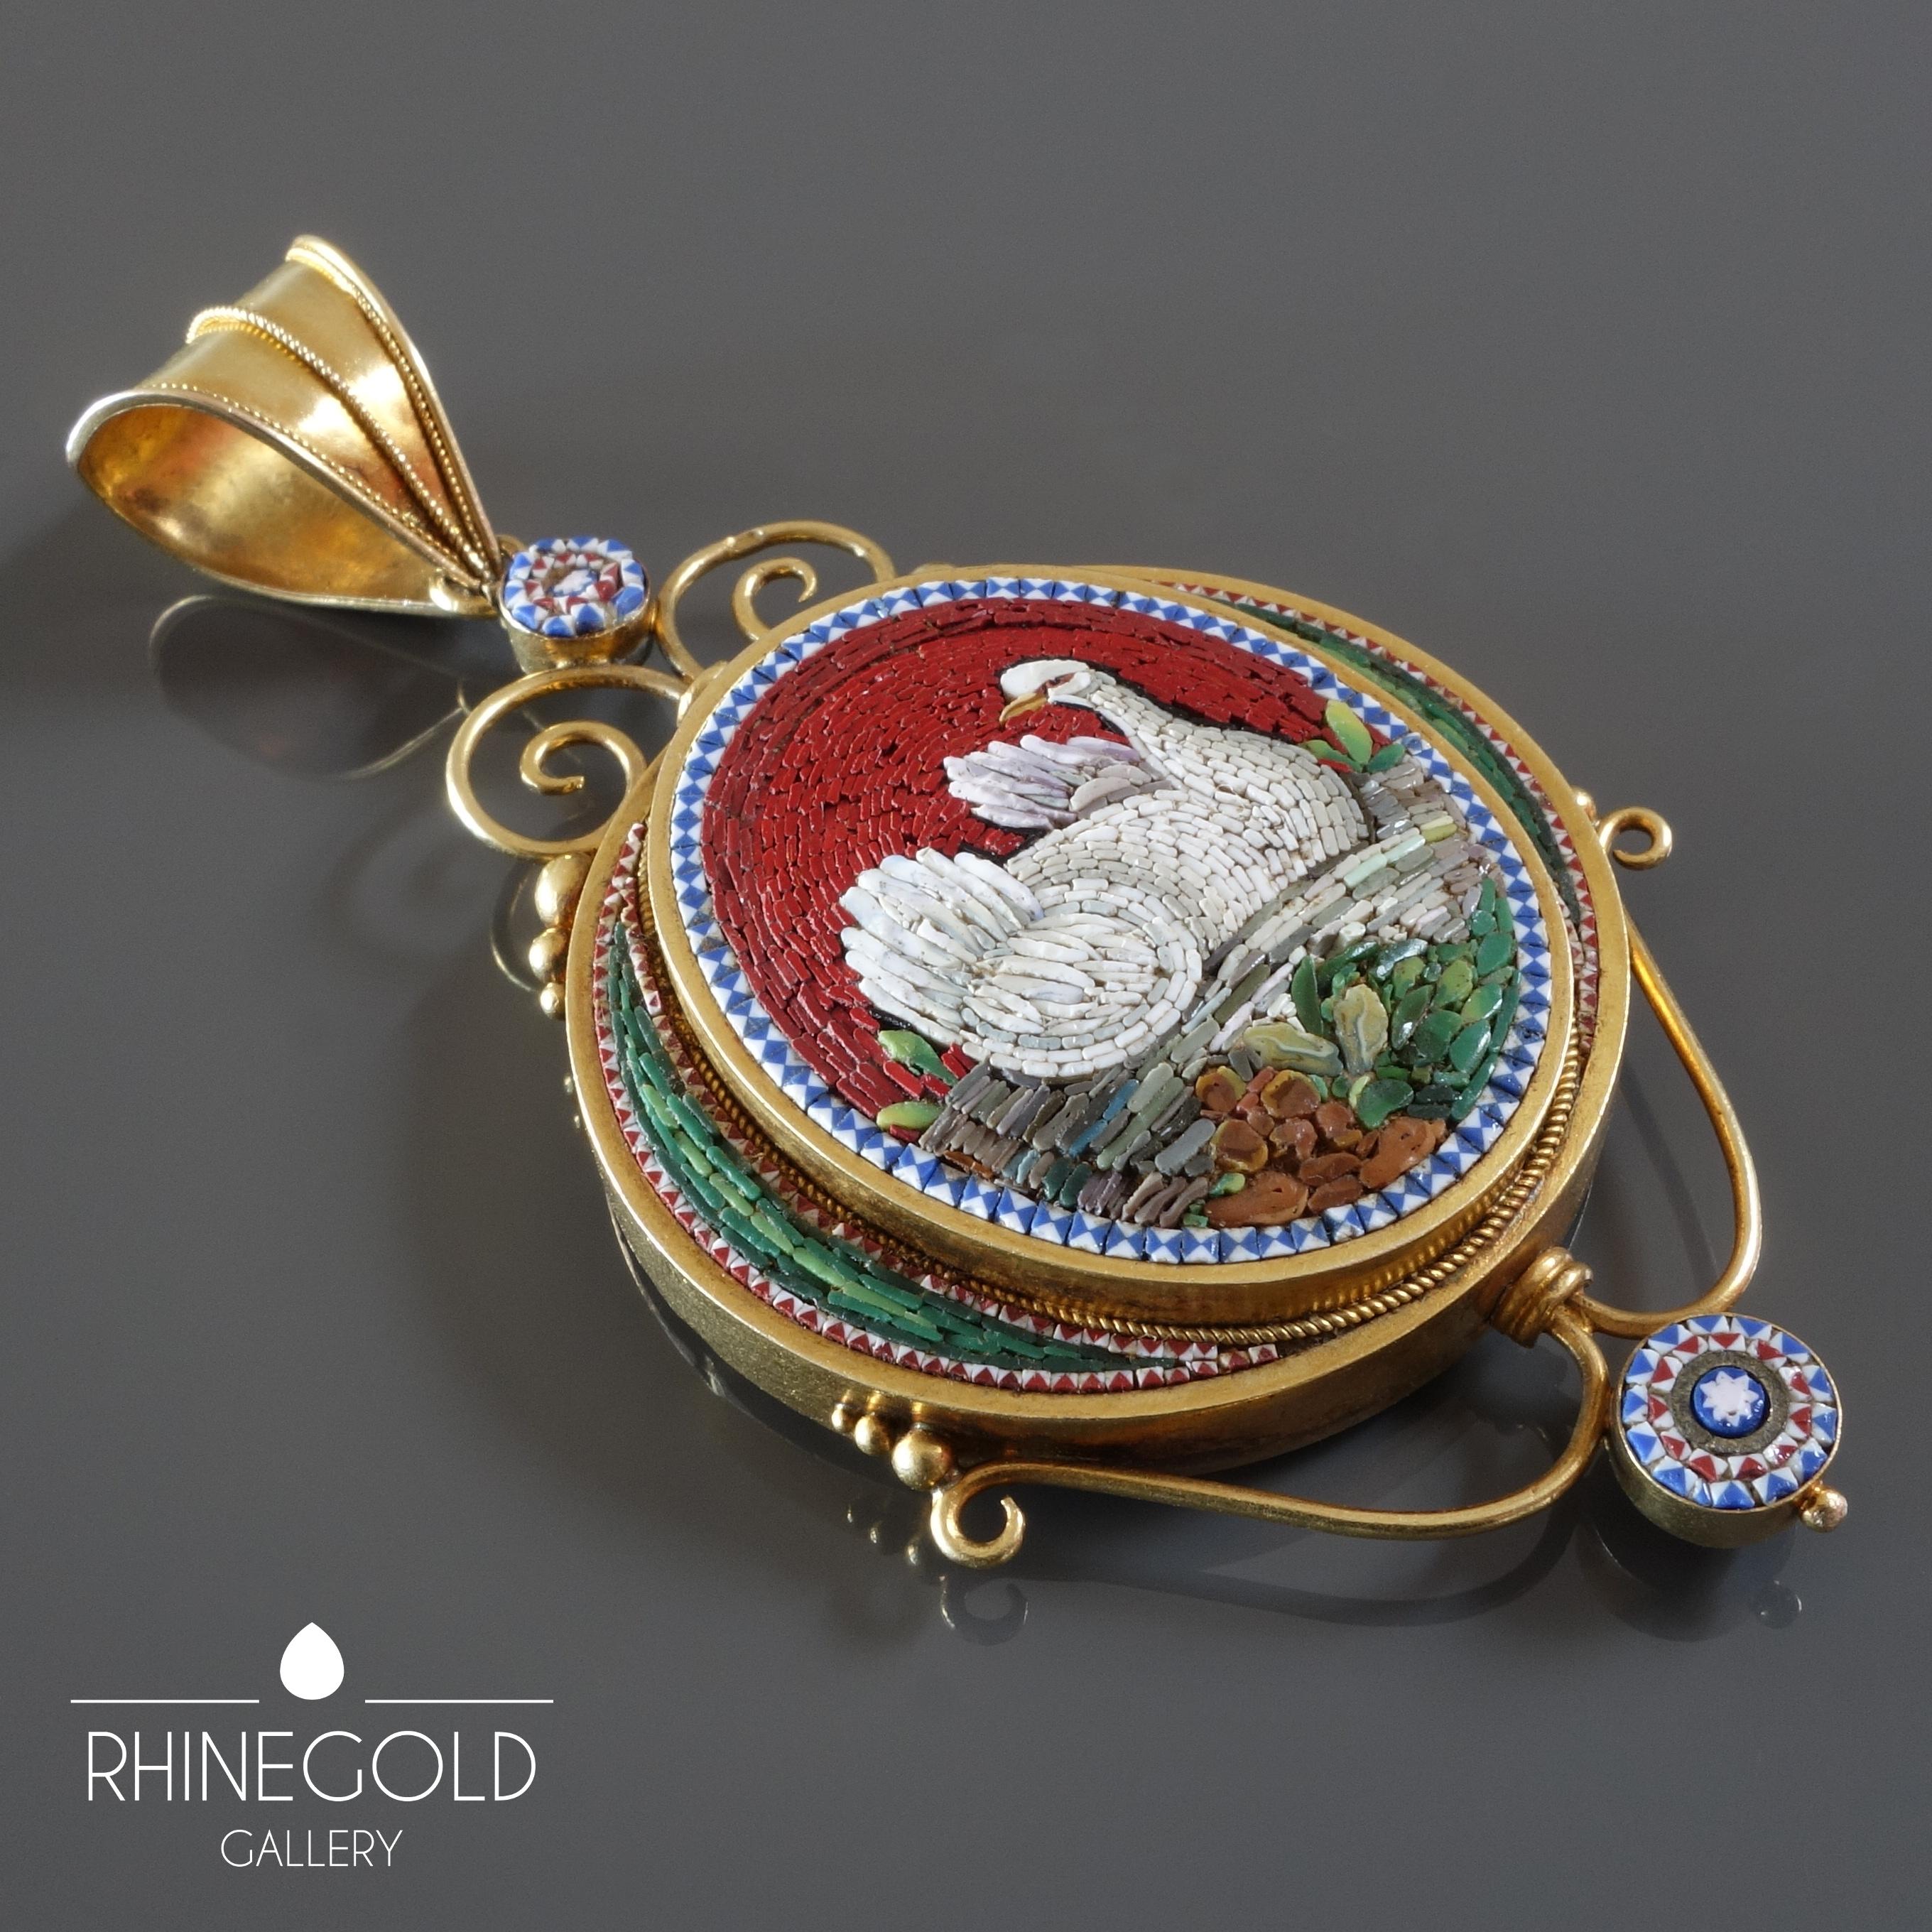 1870s Antique Grand Tour Italian Micromosaic Swan Gold Locket Pendant
18K yellow gold, glass tesserae, weight approx. 22.5 grams
L 7.6 cm (approx. 3“), W 3.8 cm (approx. 1 1/2“)
Marks: illegible; tested for 18k gold
Italy, 1870s

An antique Italian